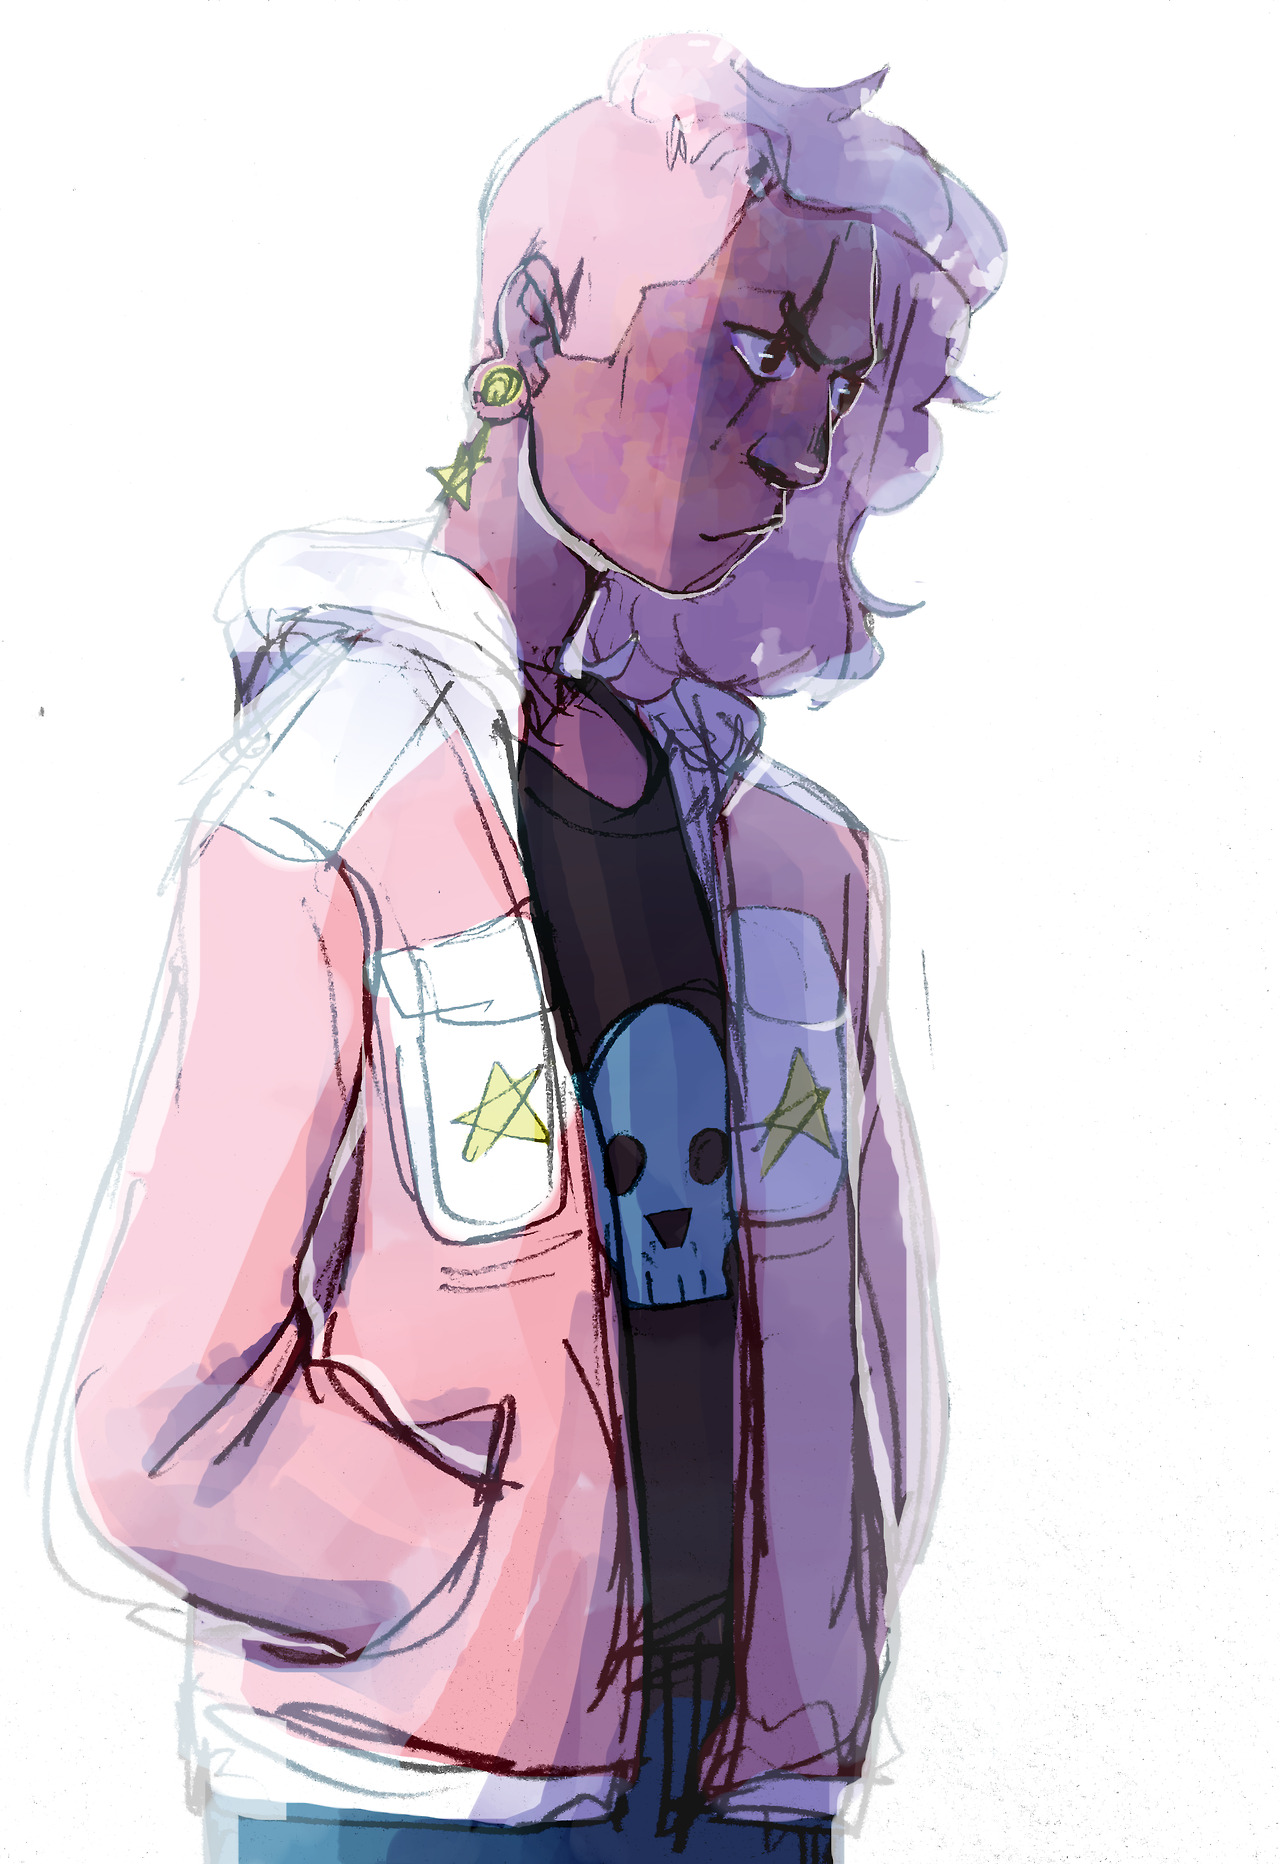 my tablet’s broken so here’s a mouse colored traditional sketch of long haired lars for yall